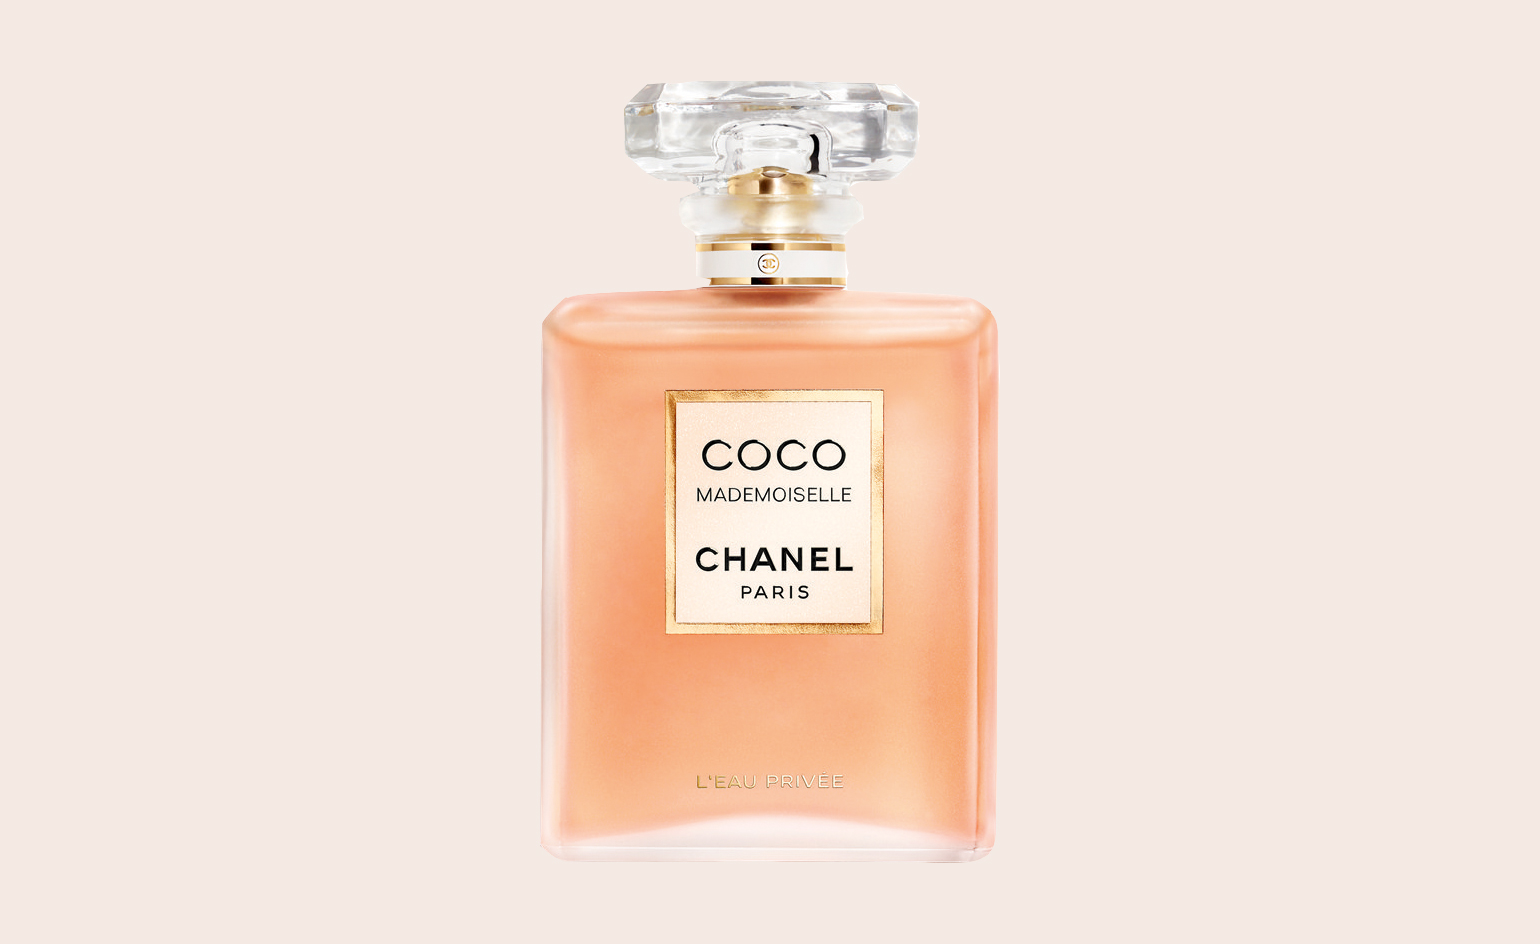 Sweet Dreams: Chanel's classic fragrance gets ready for bed